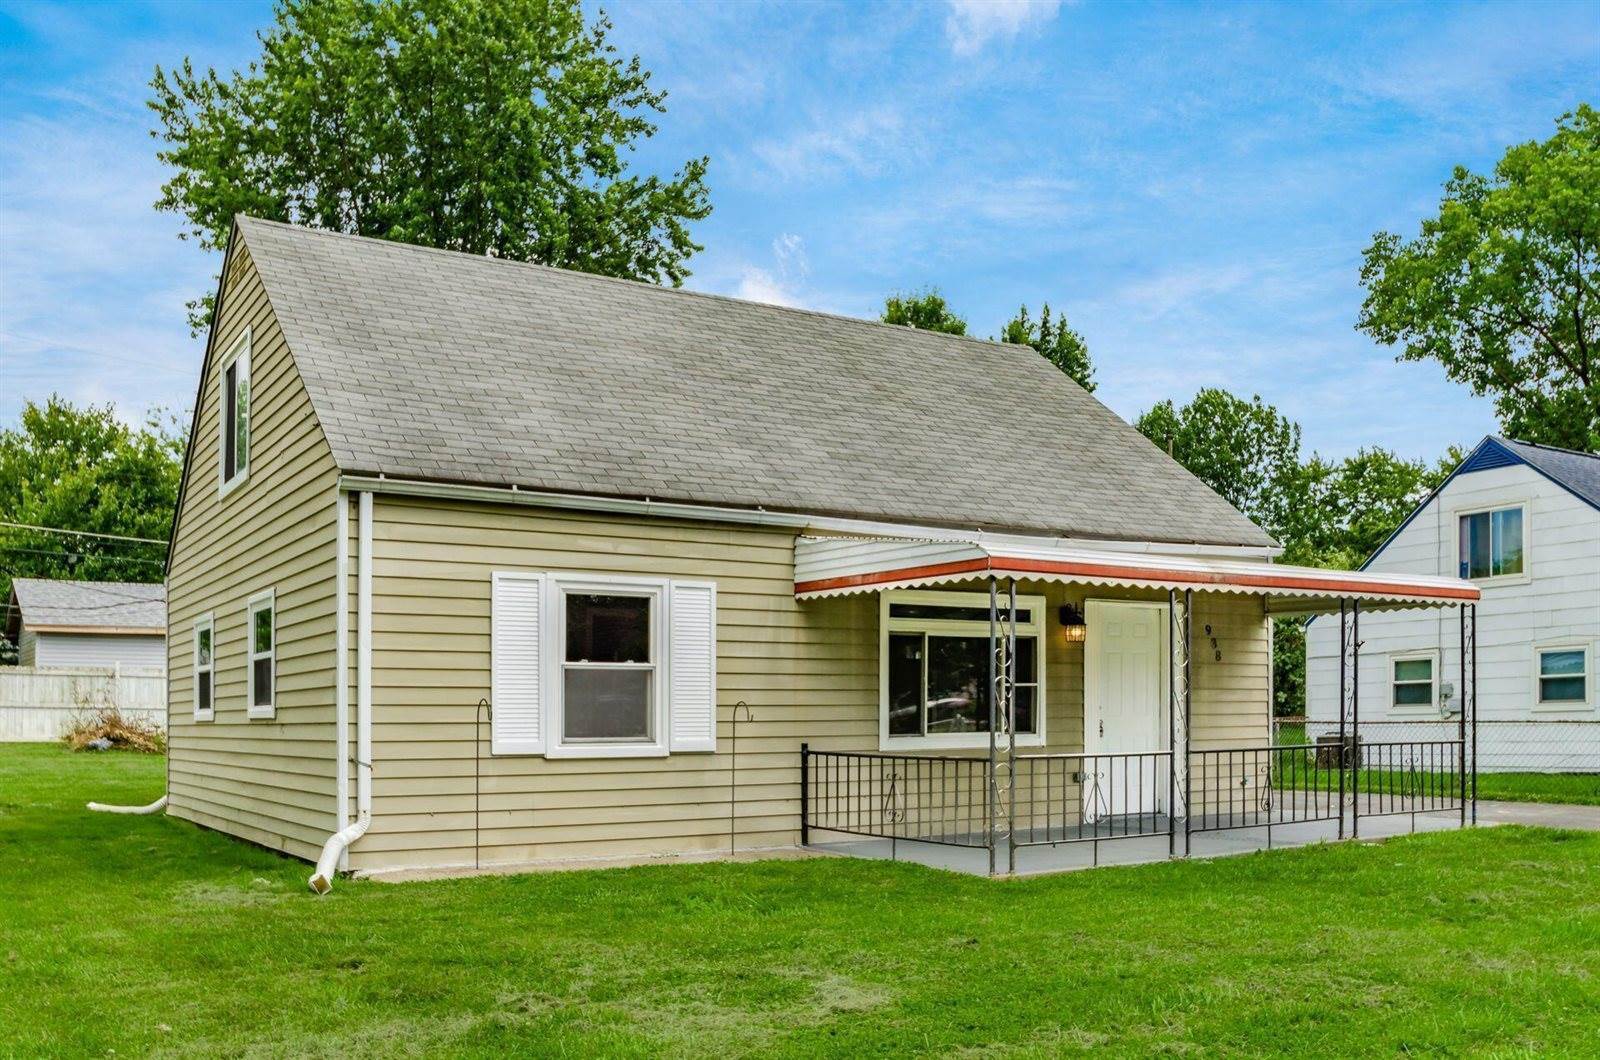 938 Bucknell Road, Whitehall, OH 43213